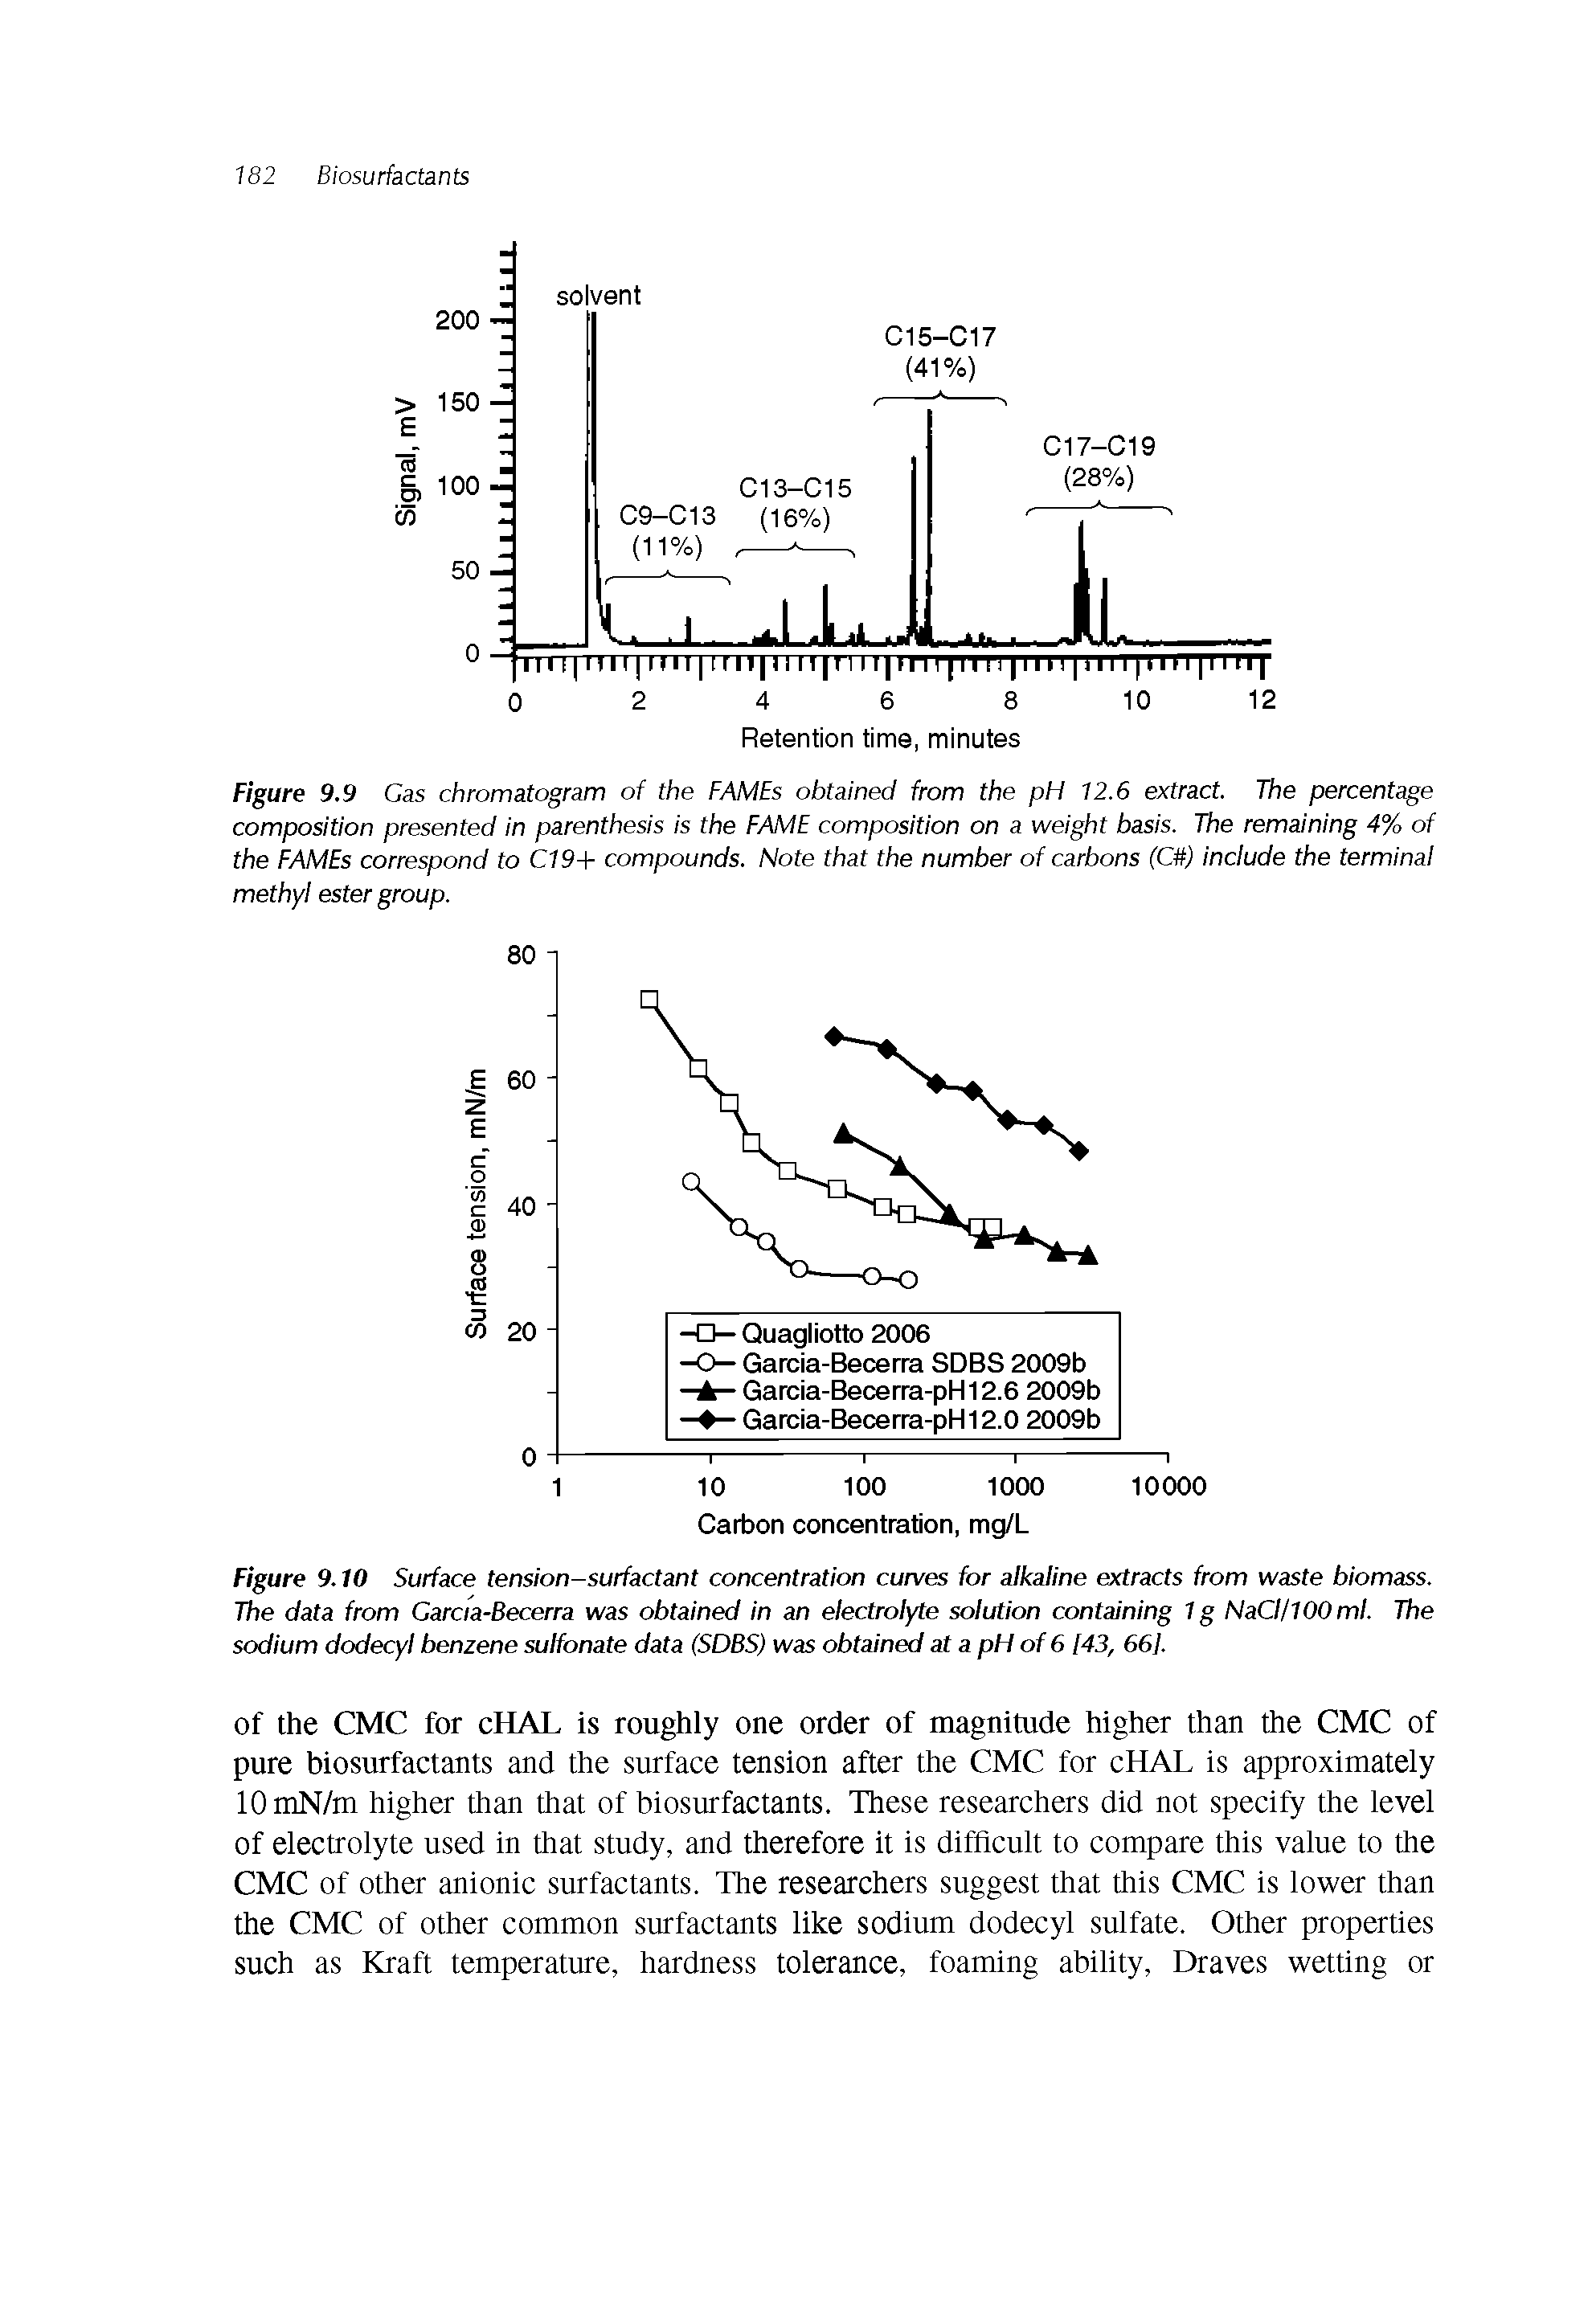 Figure 9.10 Surface tension-surfactant concentration curves for alkaline extracts from waste biomass. The data from Garcia-Becerra was obtained in an electrolyte solution containing 1 g NaCI/IOOml. The sodium dodecyl benzene sulfonate data (SDBS) was obtained at a pH of 6 [43, 661...